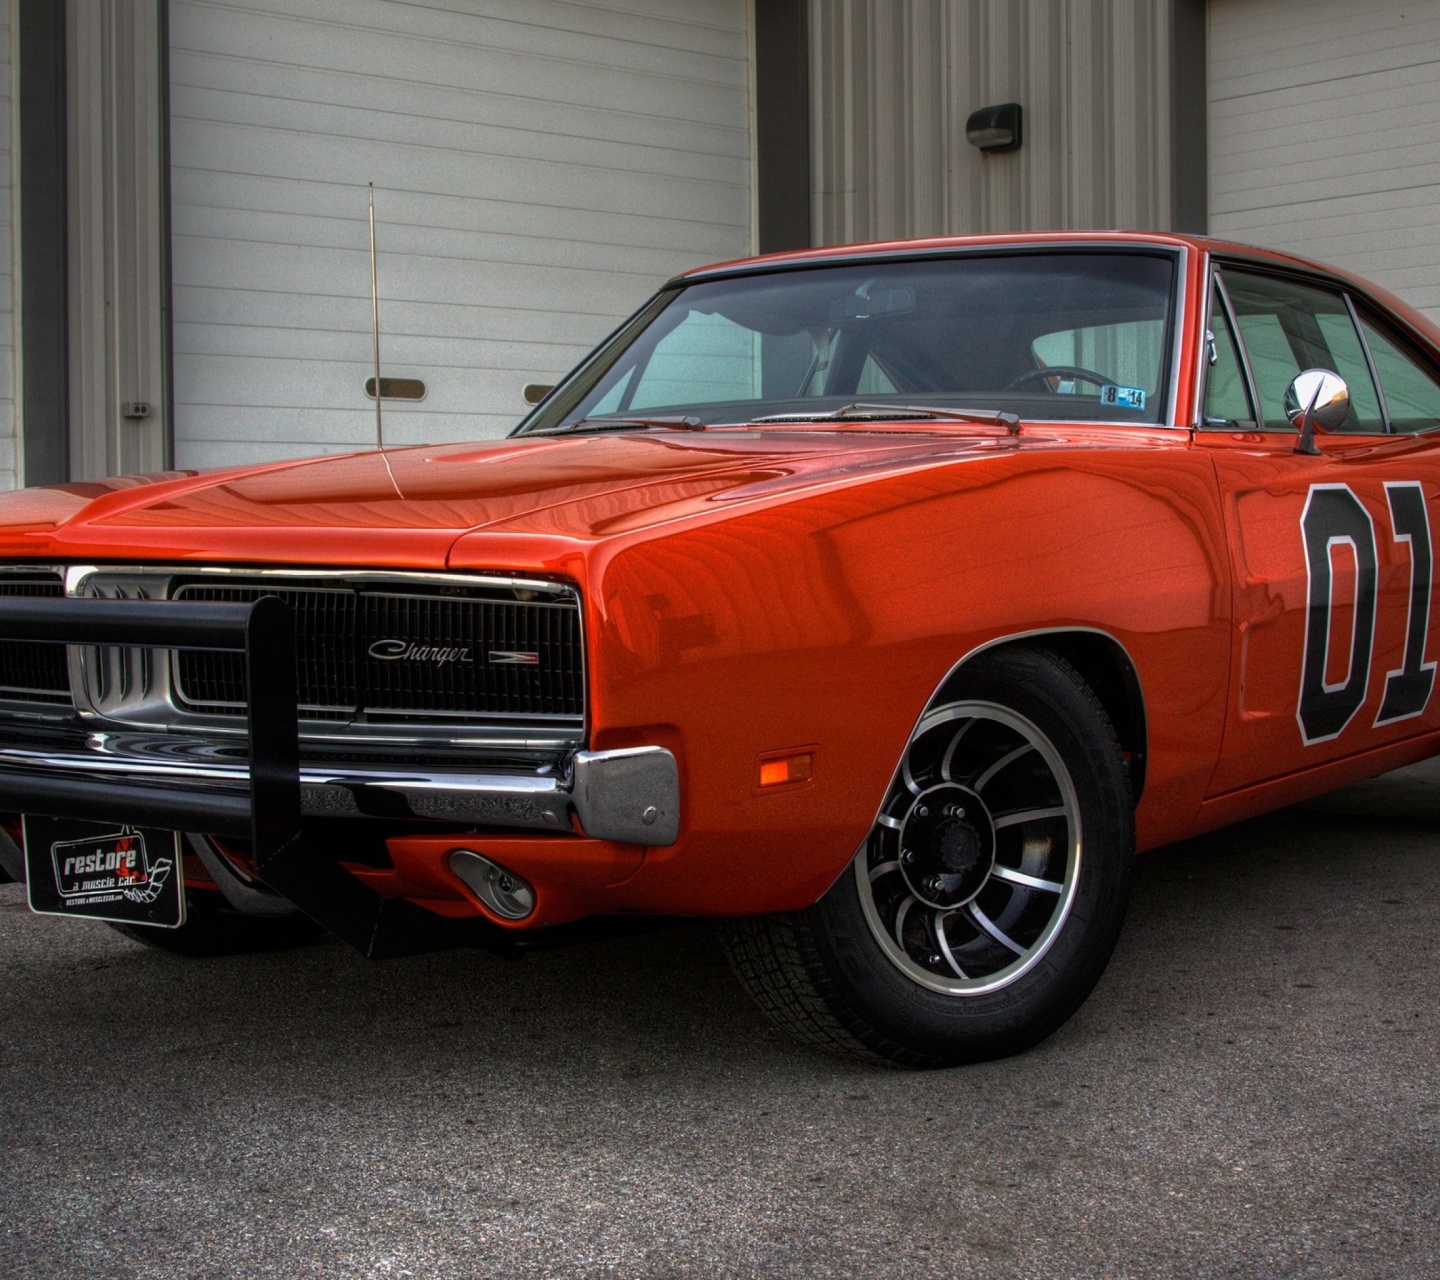 1969 Dodge Charger wallpaper 1440x1280